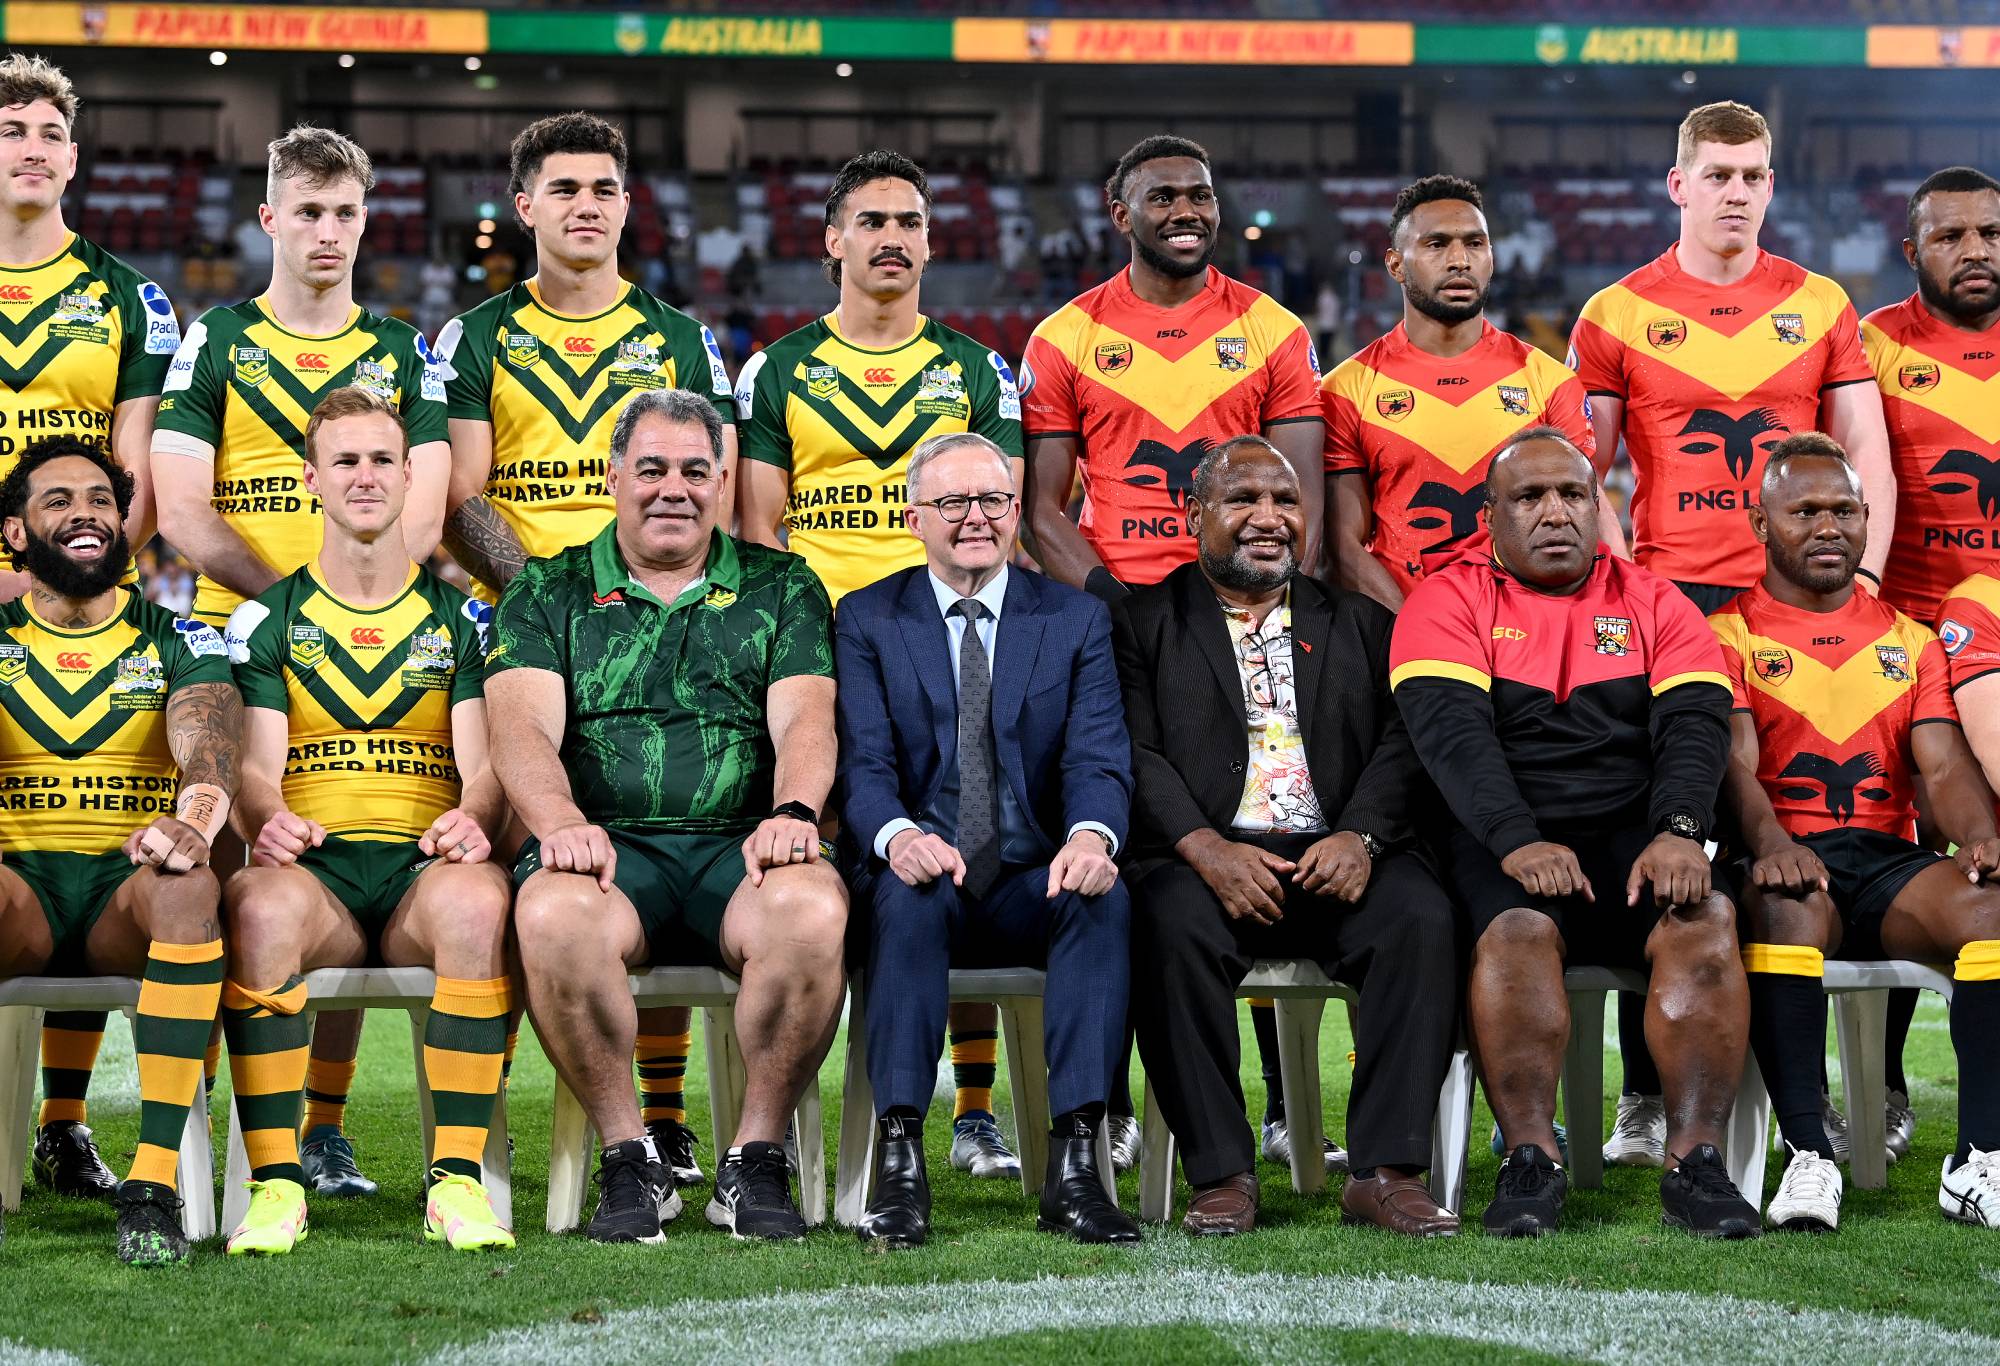  Australian Prime Minister Anthony Albanese and Papua New Guinean Prime Minister James Marape and Coach Mal Meninga of Australia pose for a photo with the players from both teams before the International match between Australian Men's PMs XIII and PNG Men's PMs XIII at Suncorp Stadium on September 25, 2022 in Brisbane, Australia. (Photo by Bradley Kanaris/Getty Images)